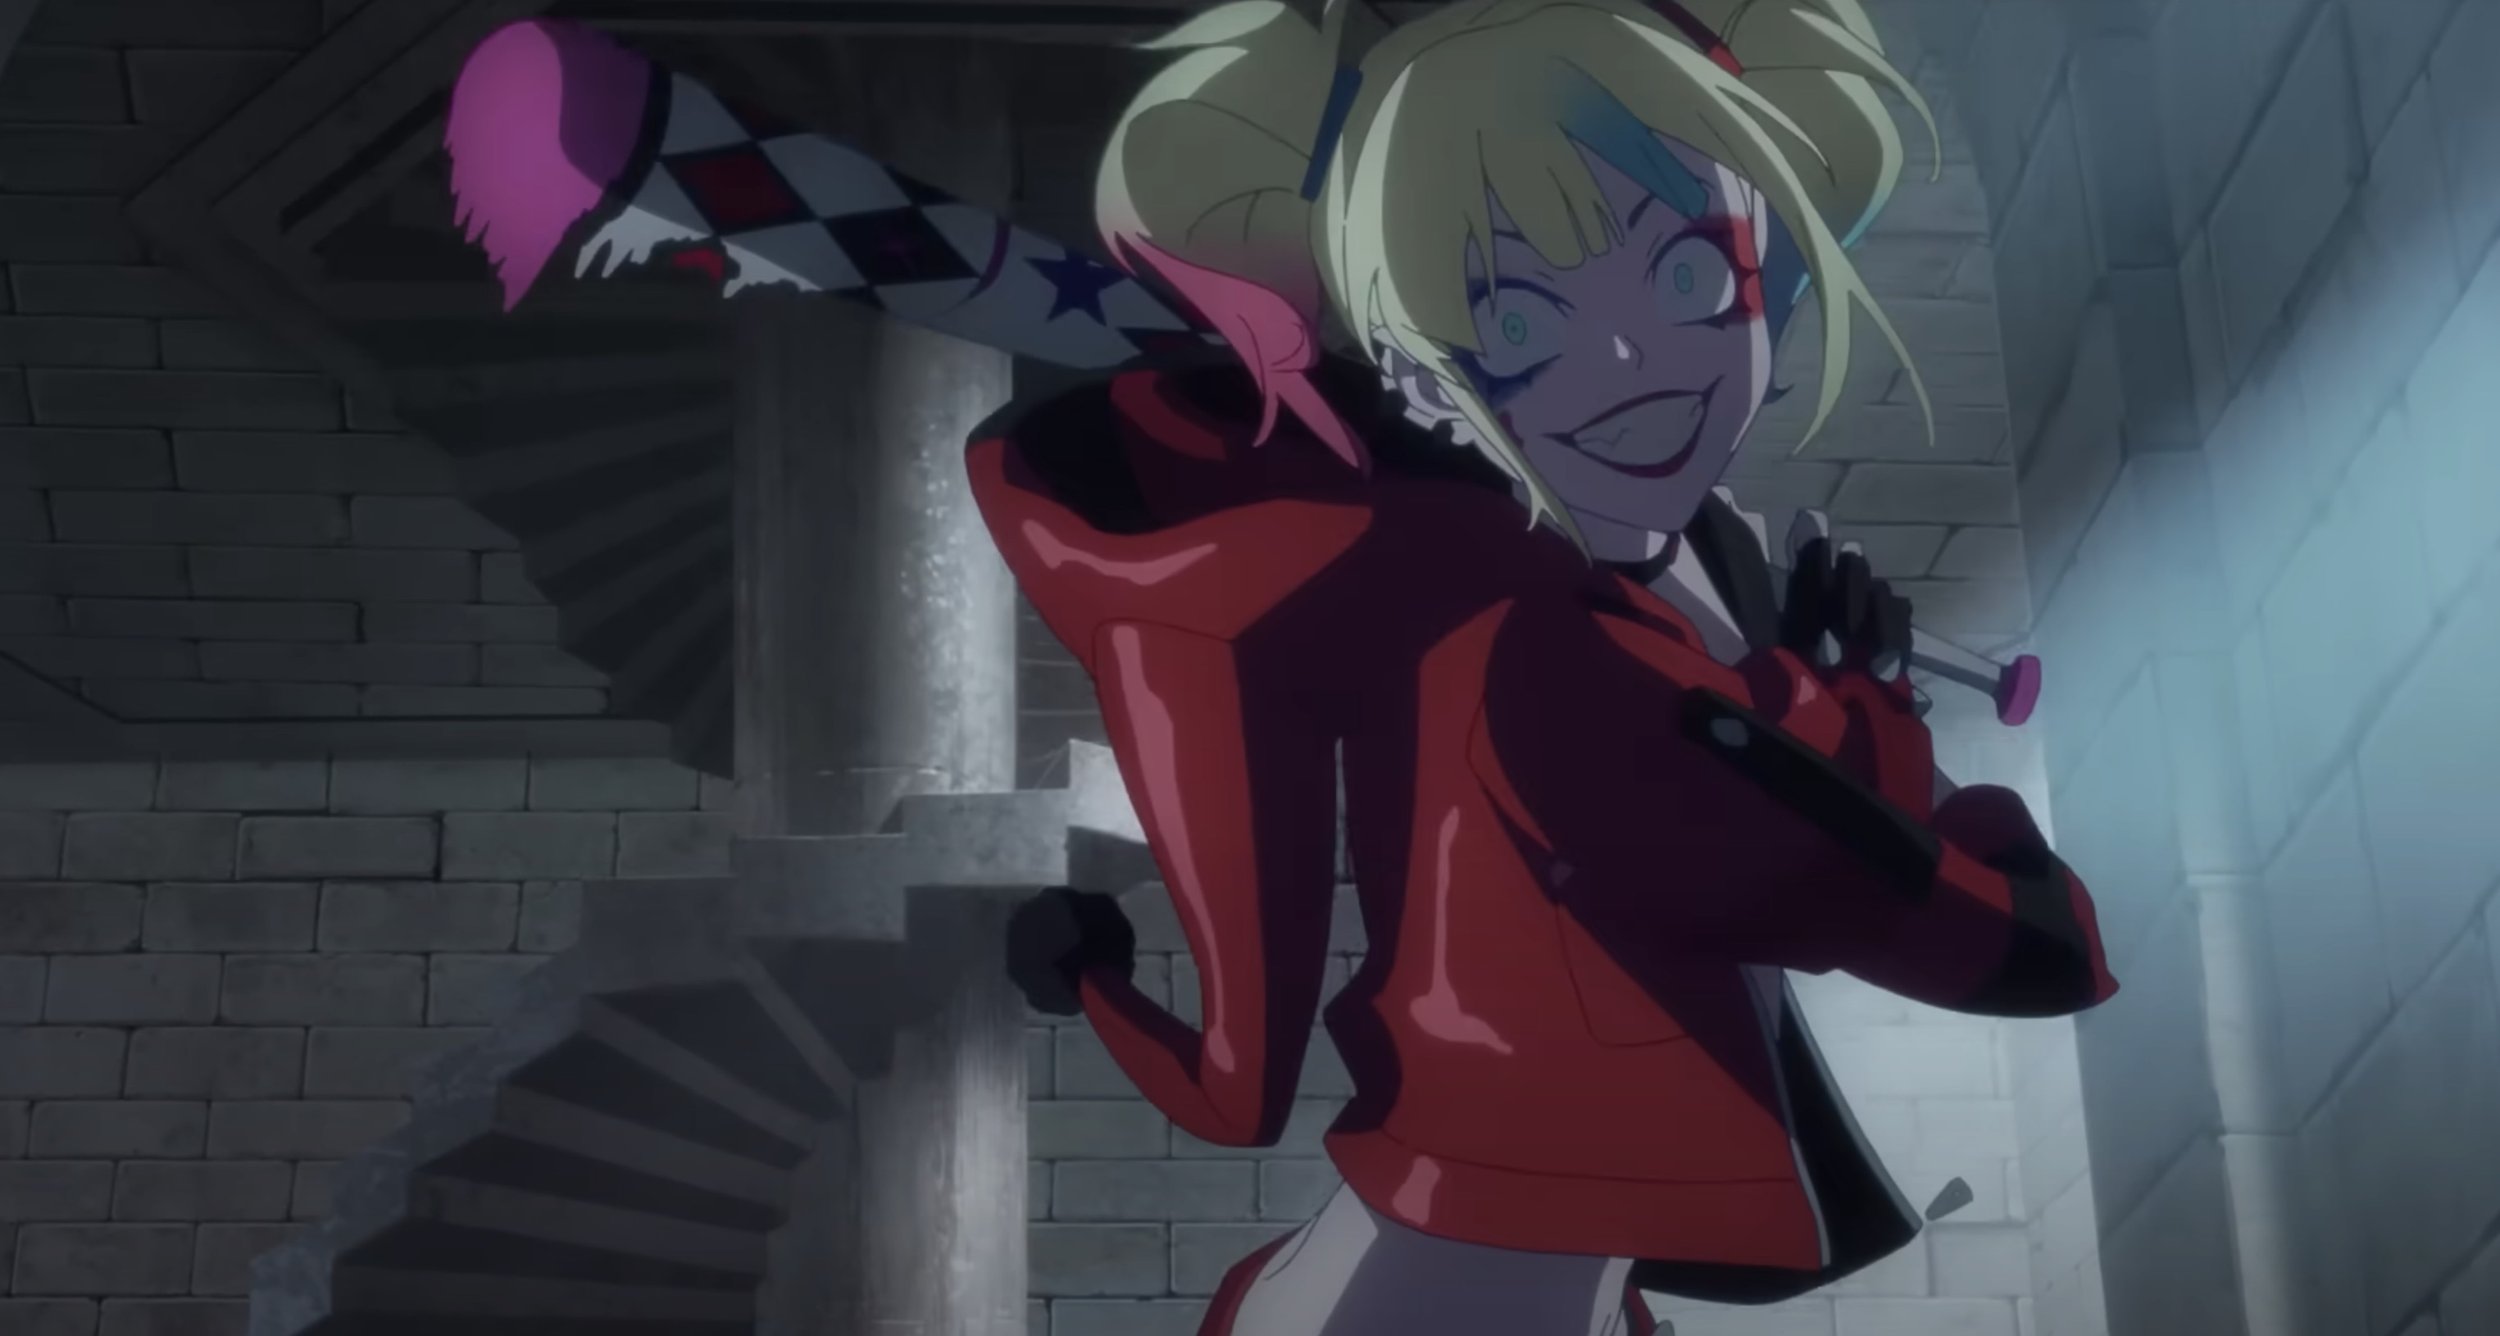 Bonkers New Trailer for the DC Anime Series SUICIDE SQUAD ISEKAI —  GeekTyrant